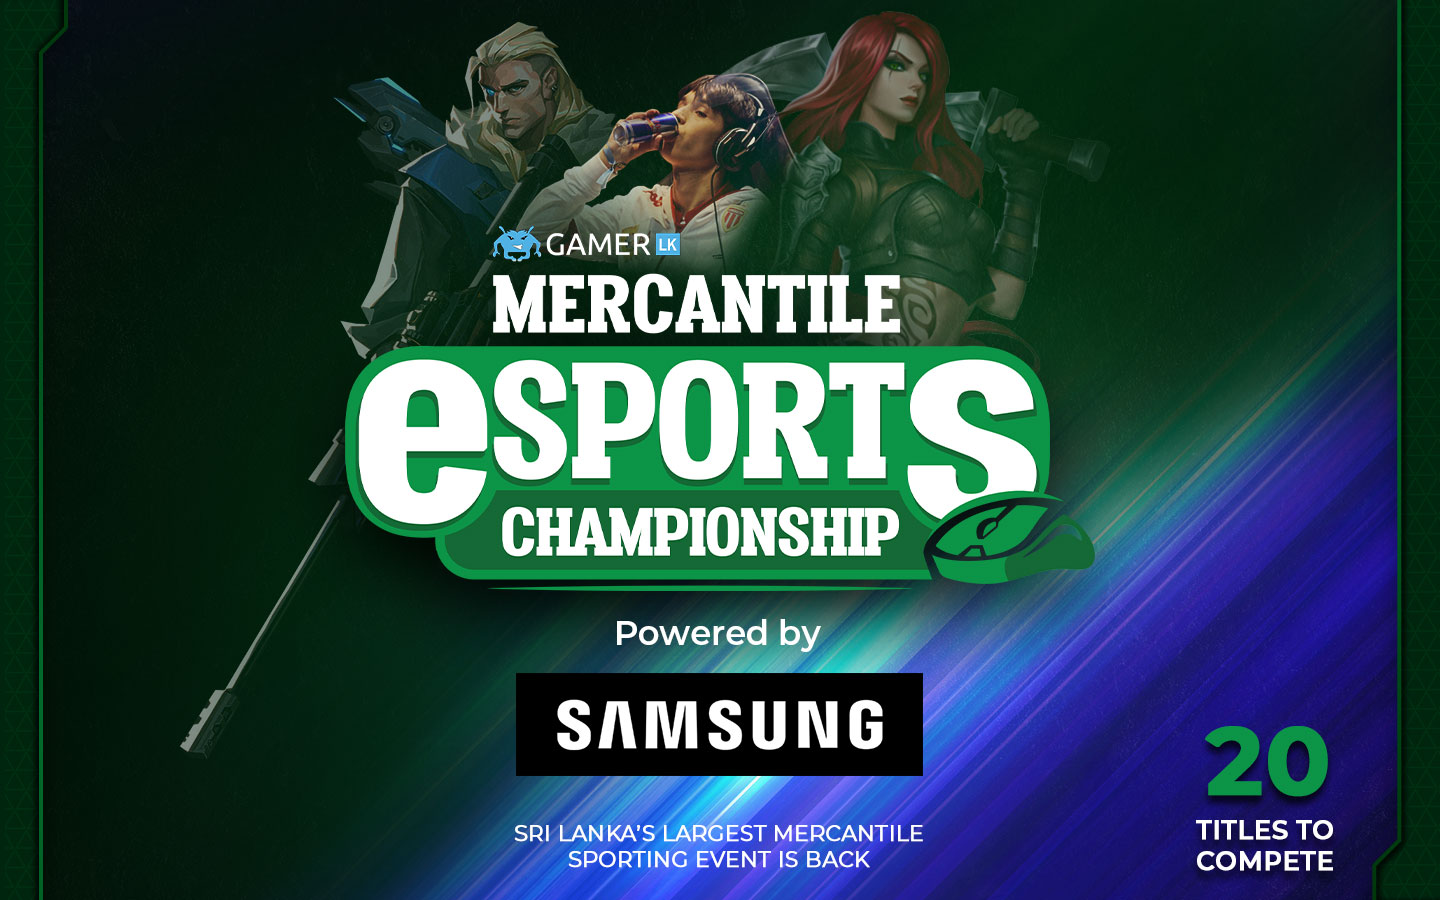 Free Fire Mercantile Esports Championship 21 by Gamer.LK InGame Esports